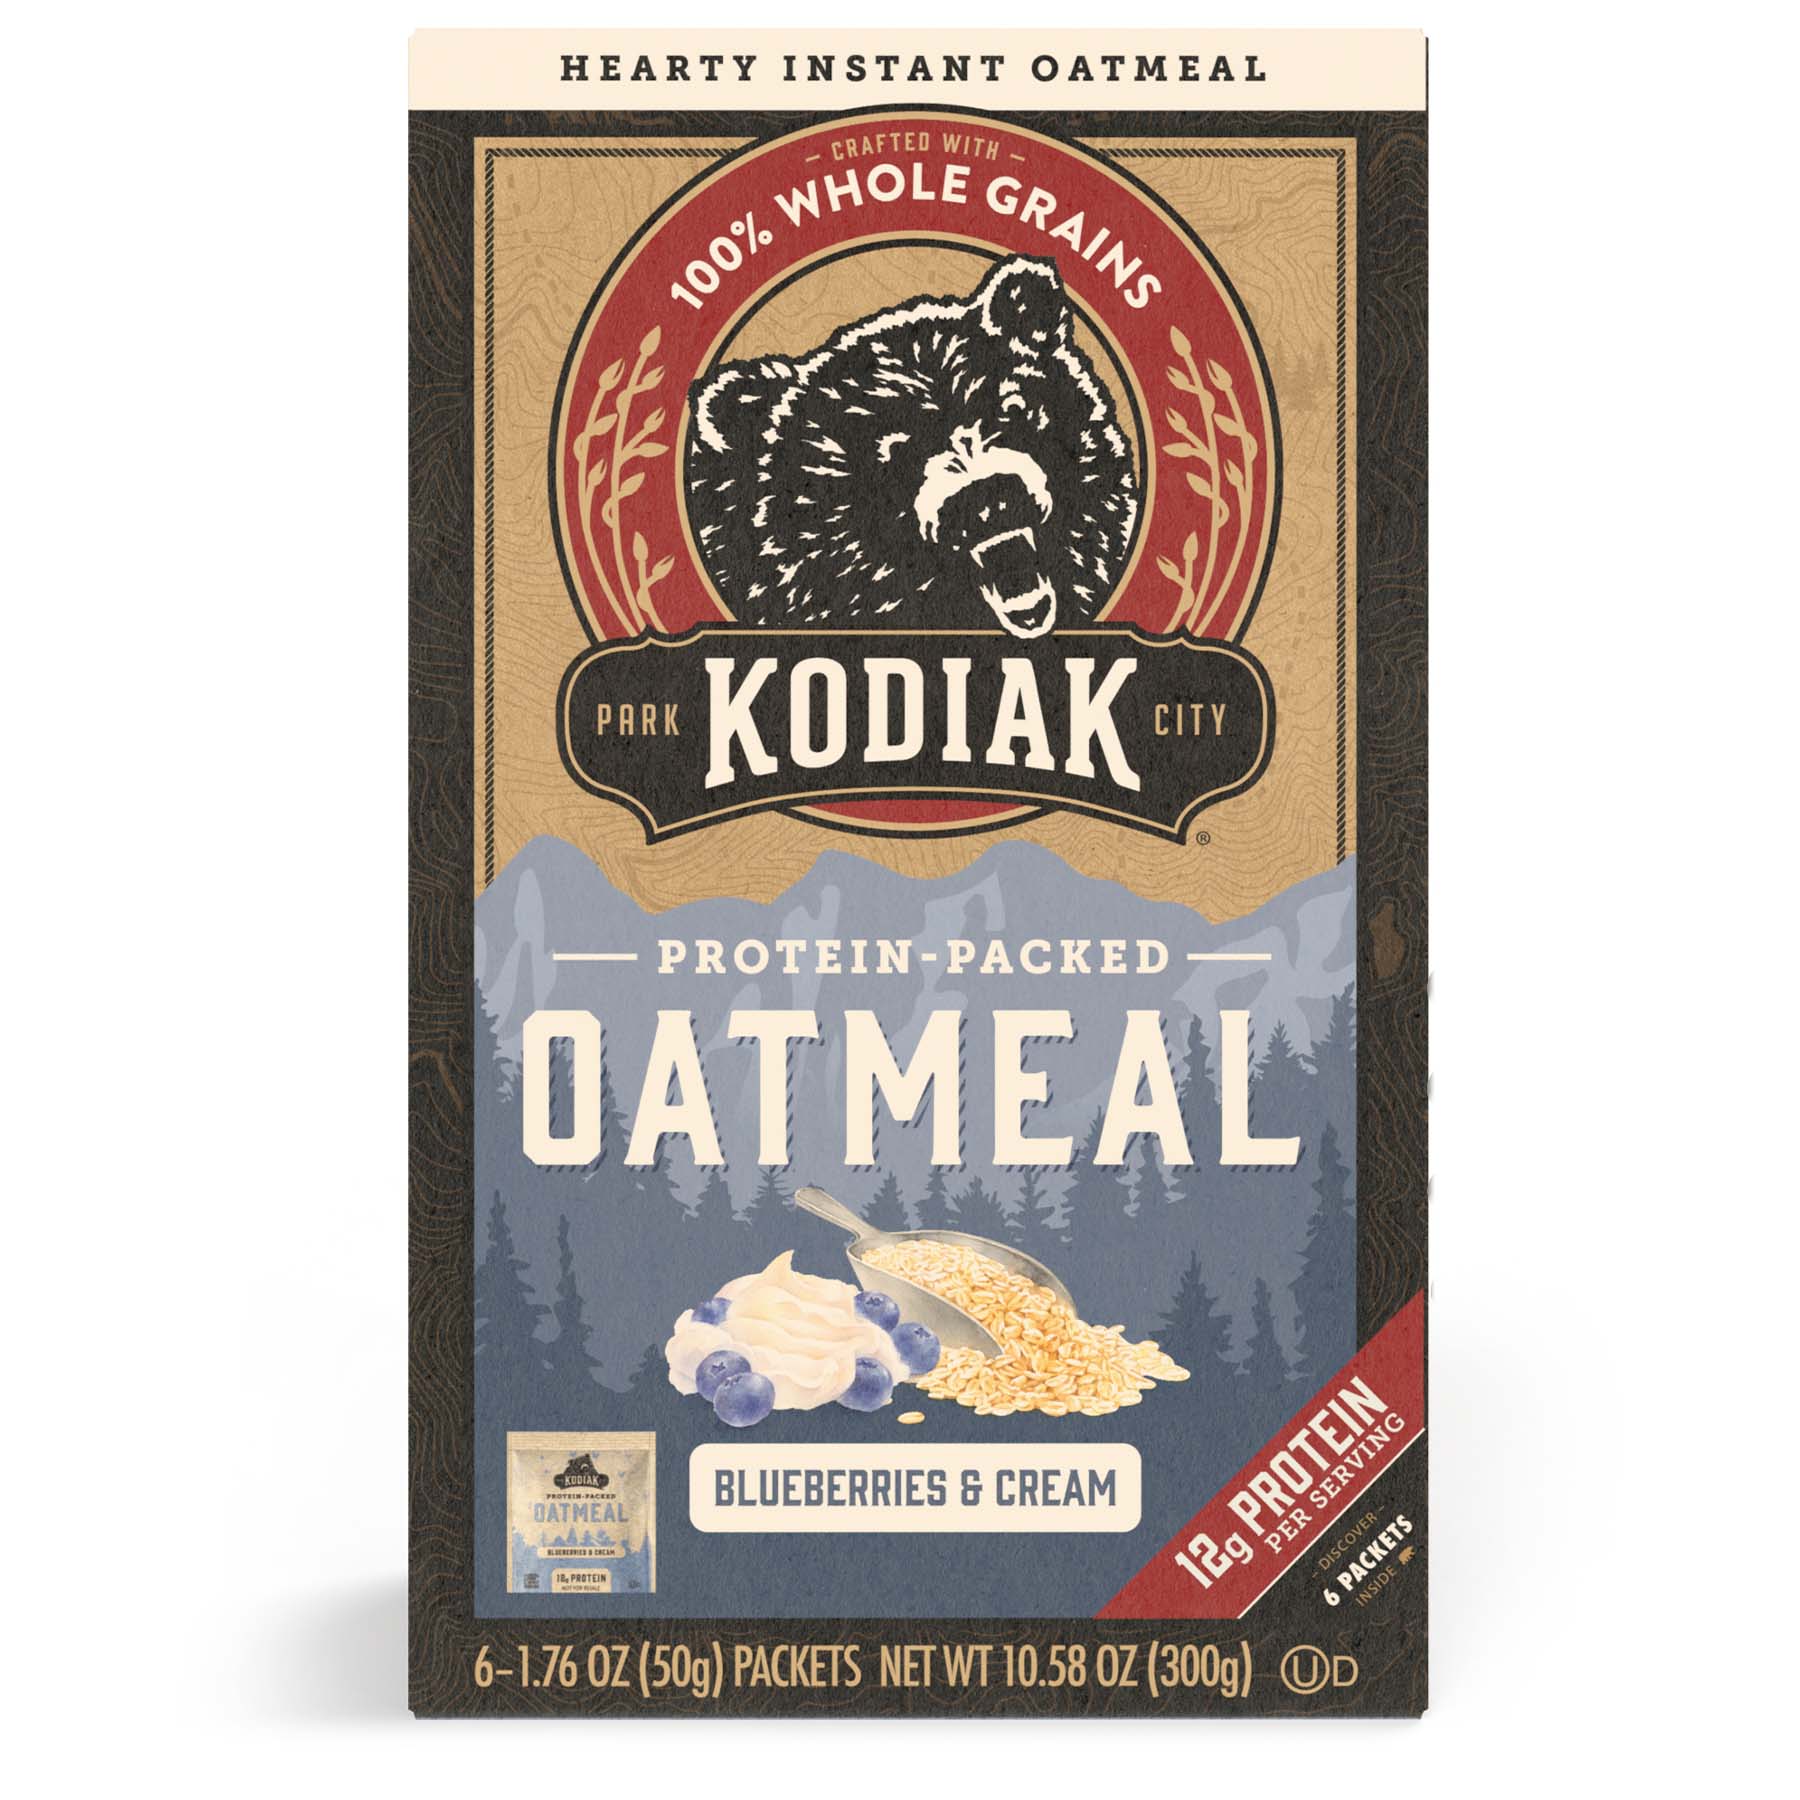 Kodiak Protein-Packed Blueberries and Cream Instant Oatmeal, 1.76 oz, 6 ...